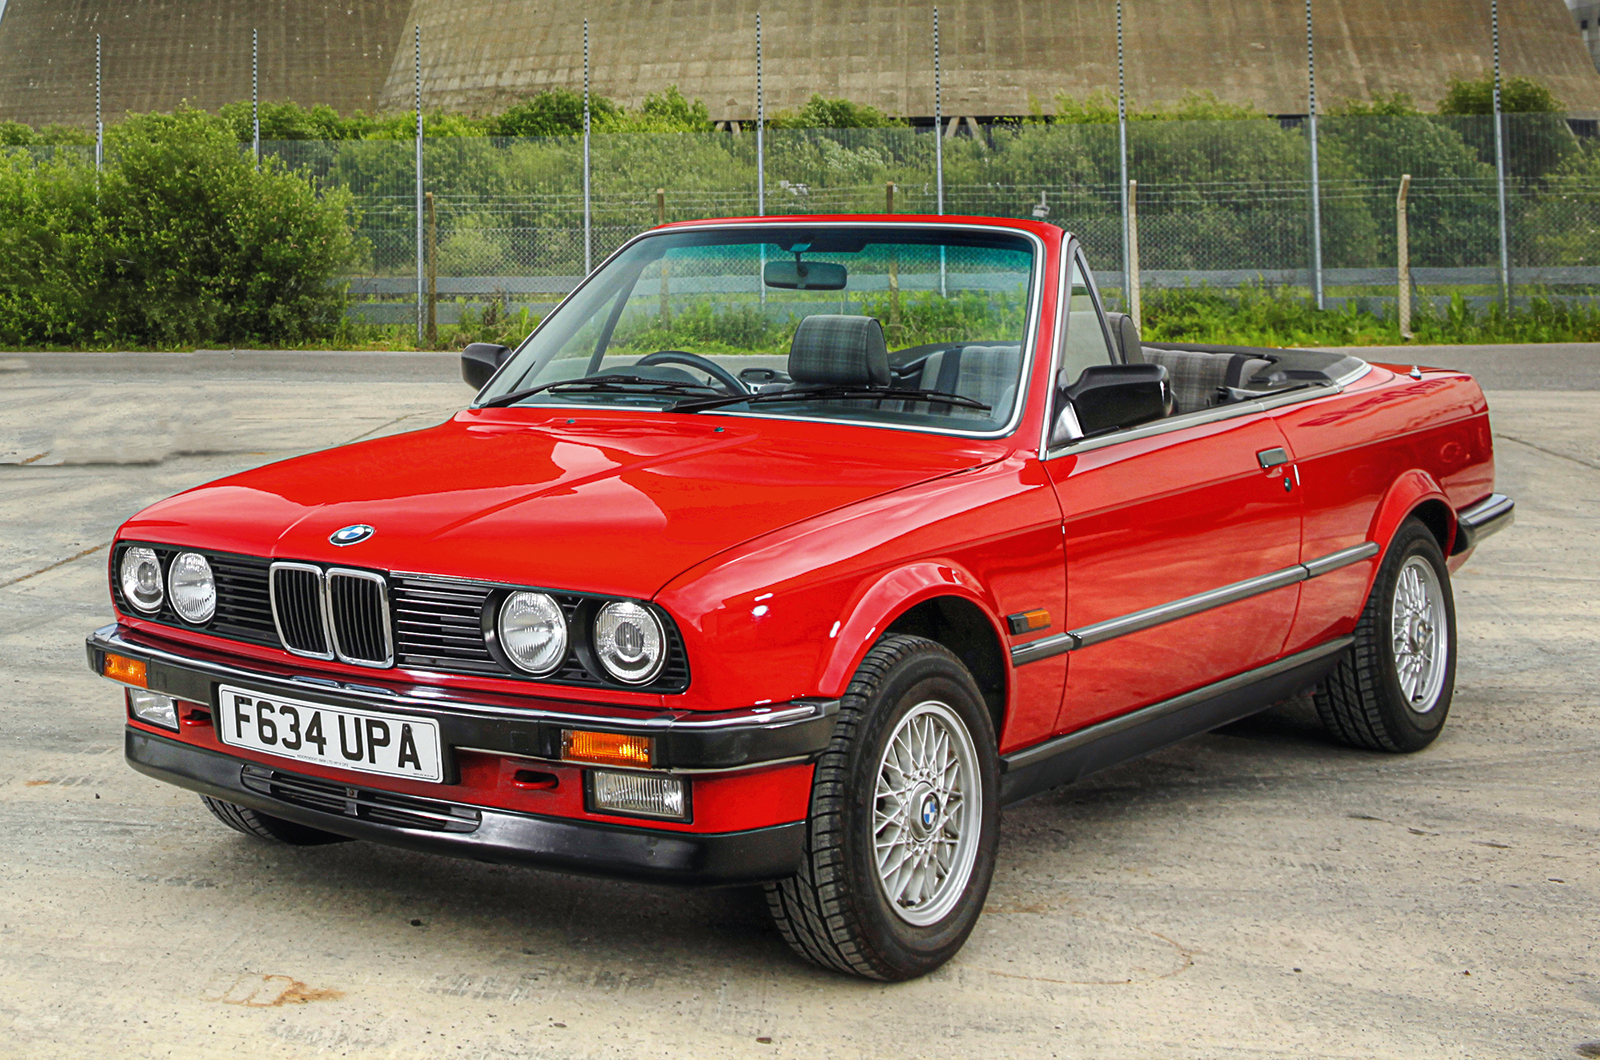 BMW E30 3 Series buyer's guide: what to pay and what to look for